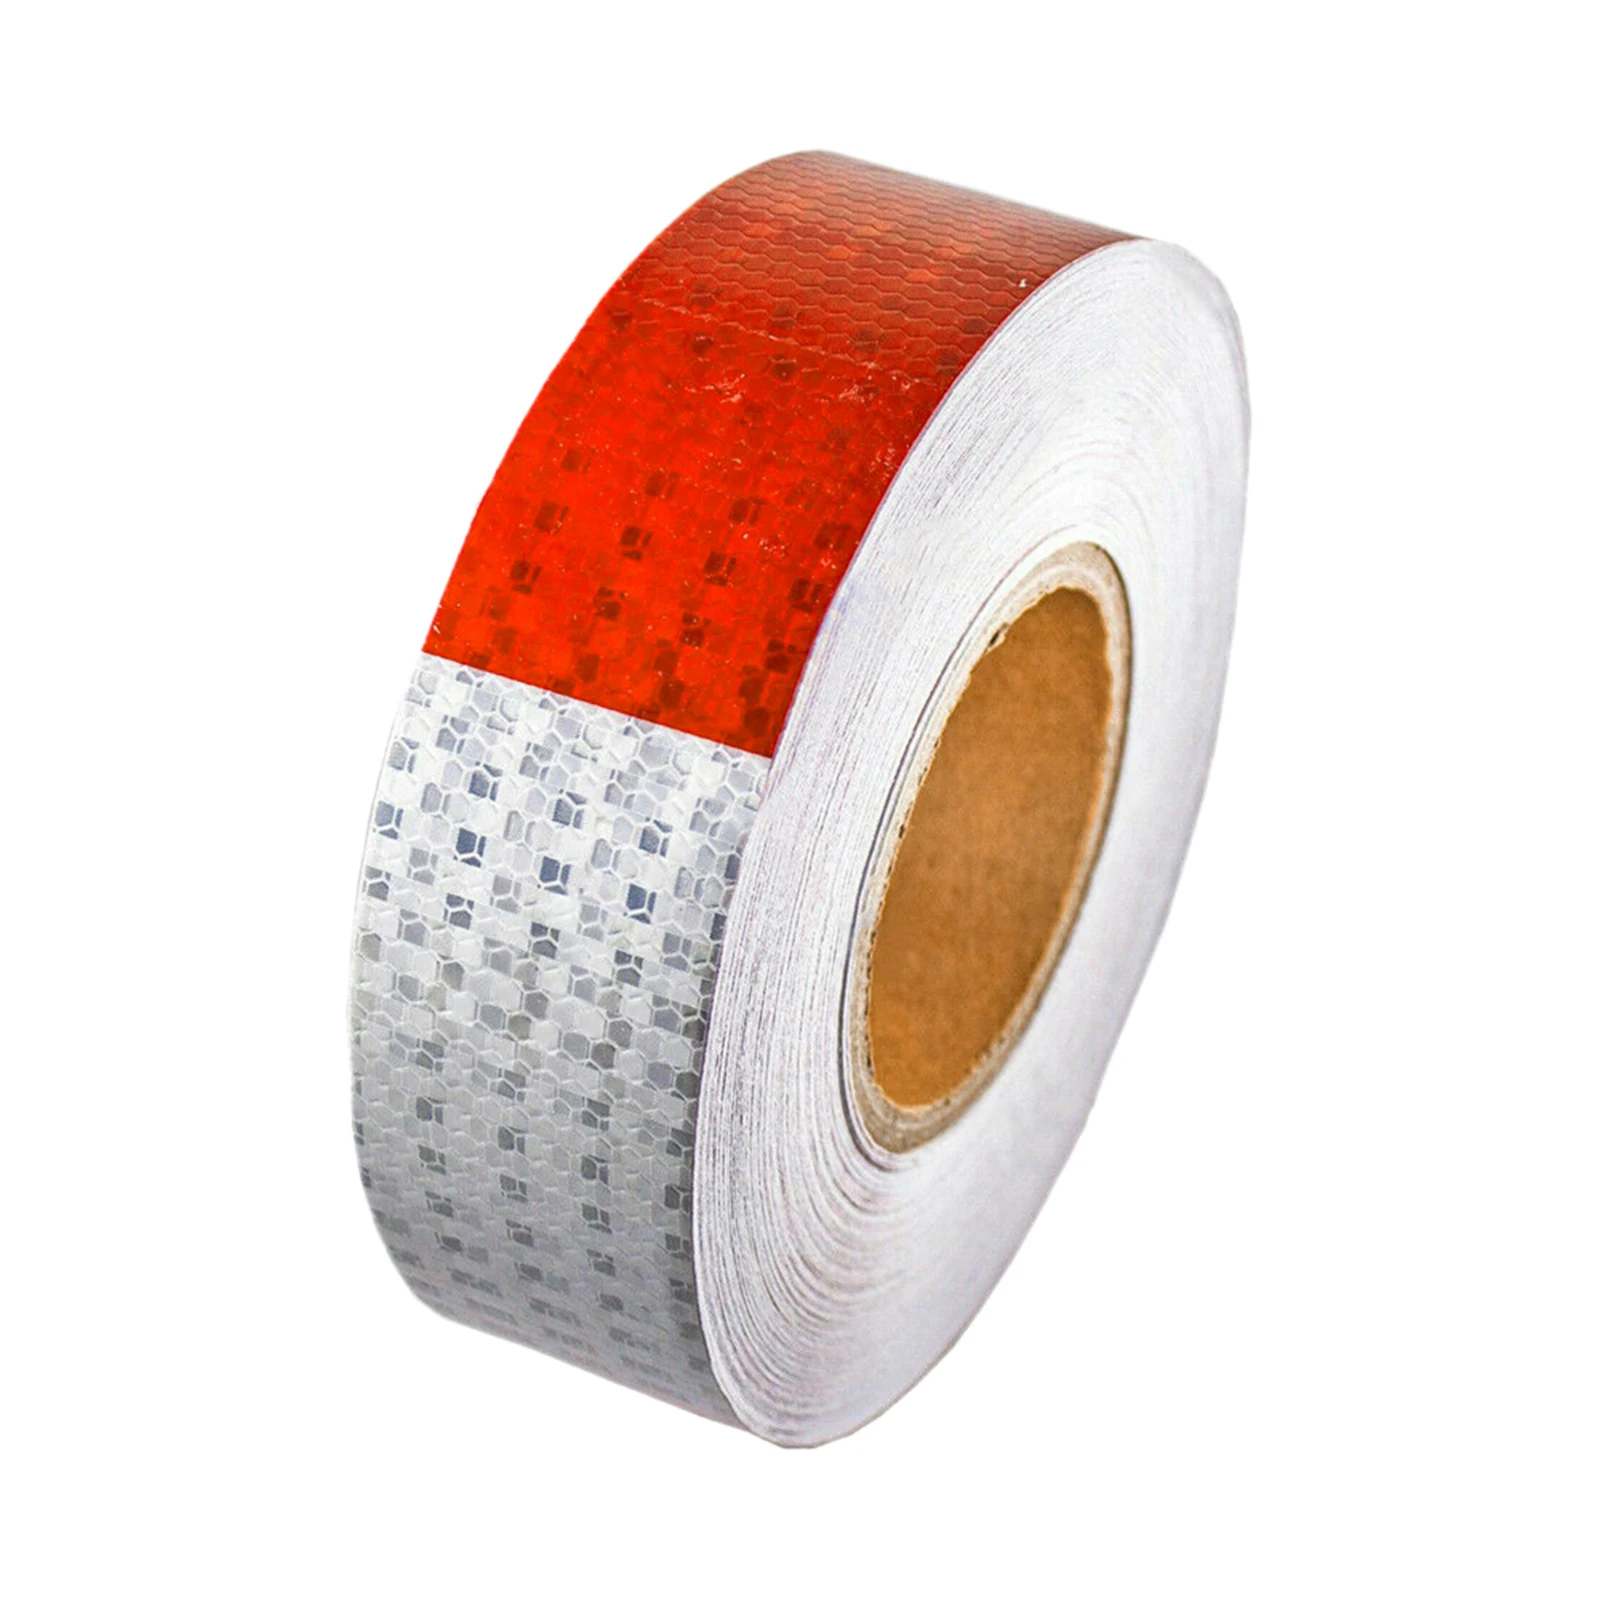 Reflective Tape Sticker Adhesive Safety Mark Warning Tape Bike Automobiles Motorcycle Car Styling